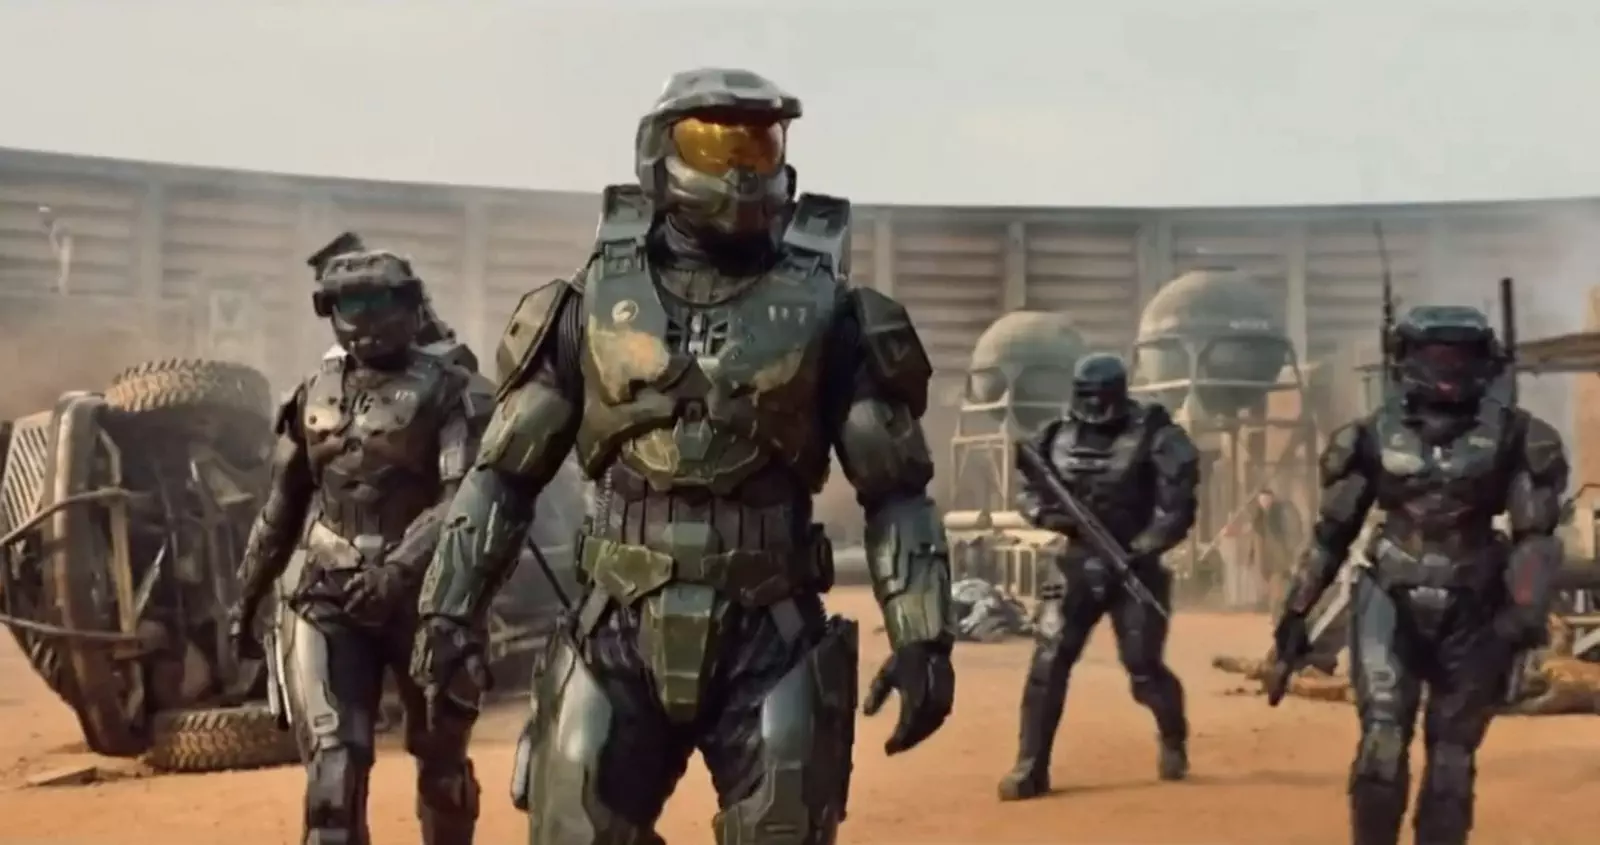 Master Chief John-117 is Back in First Teaser for 'Halo' Series